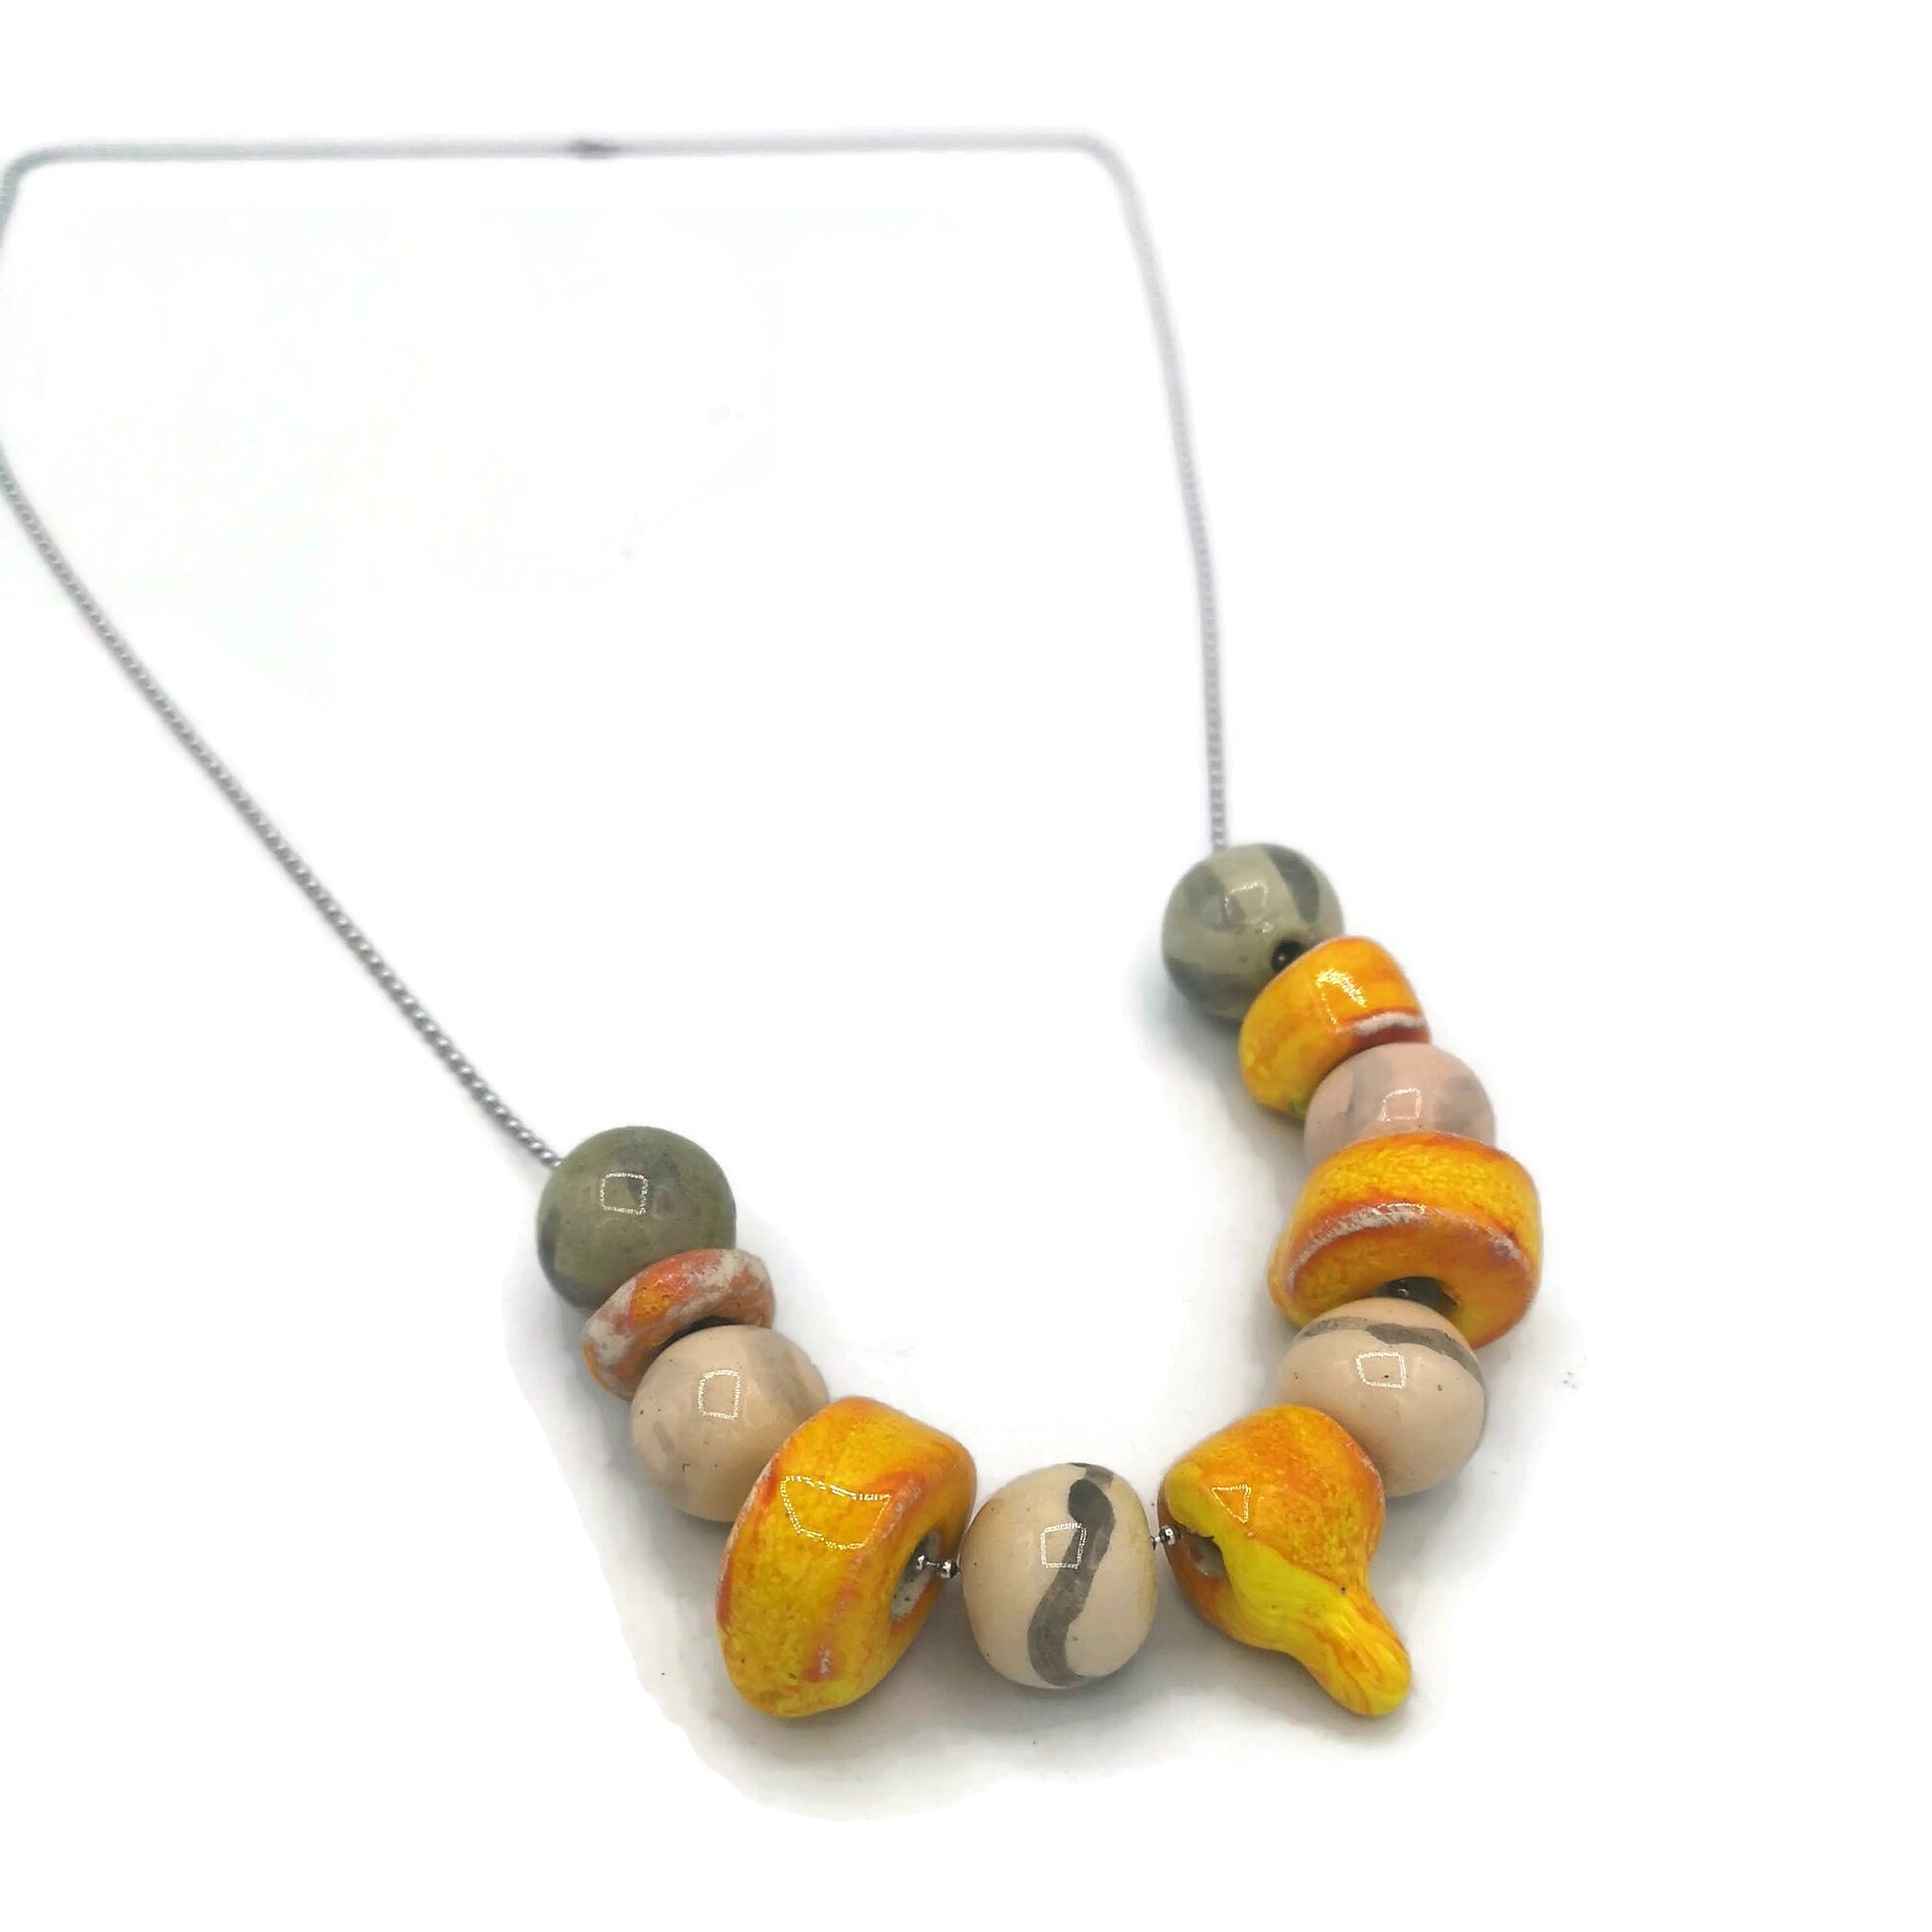 Colorful Beaded Necklace, Statement Aestethic Necklace, Mothers Day Gift From Daughter, Best Gifts For Her, 9th Aniversary Gift For Wife - Ceramica Ana Rafael